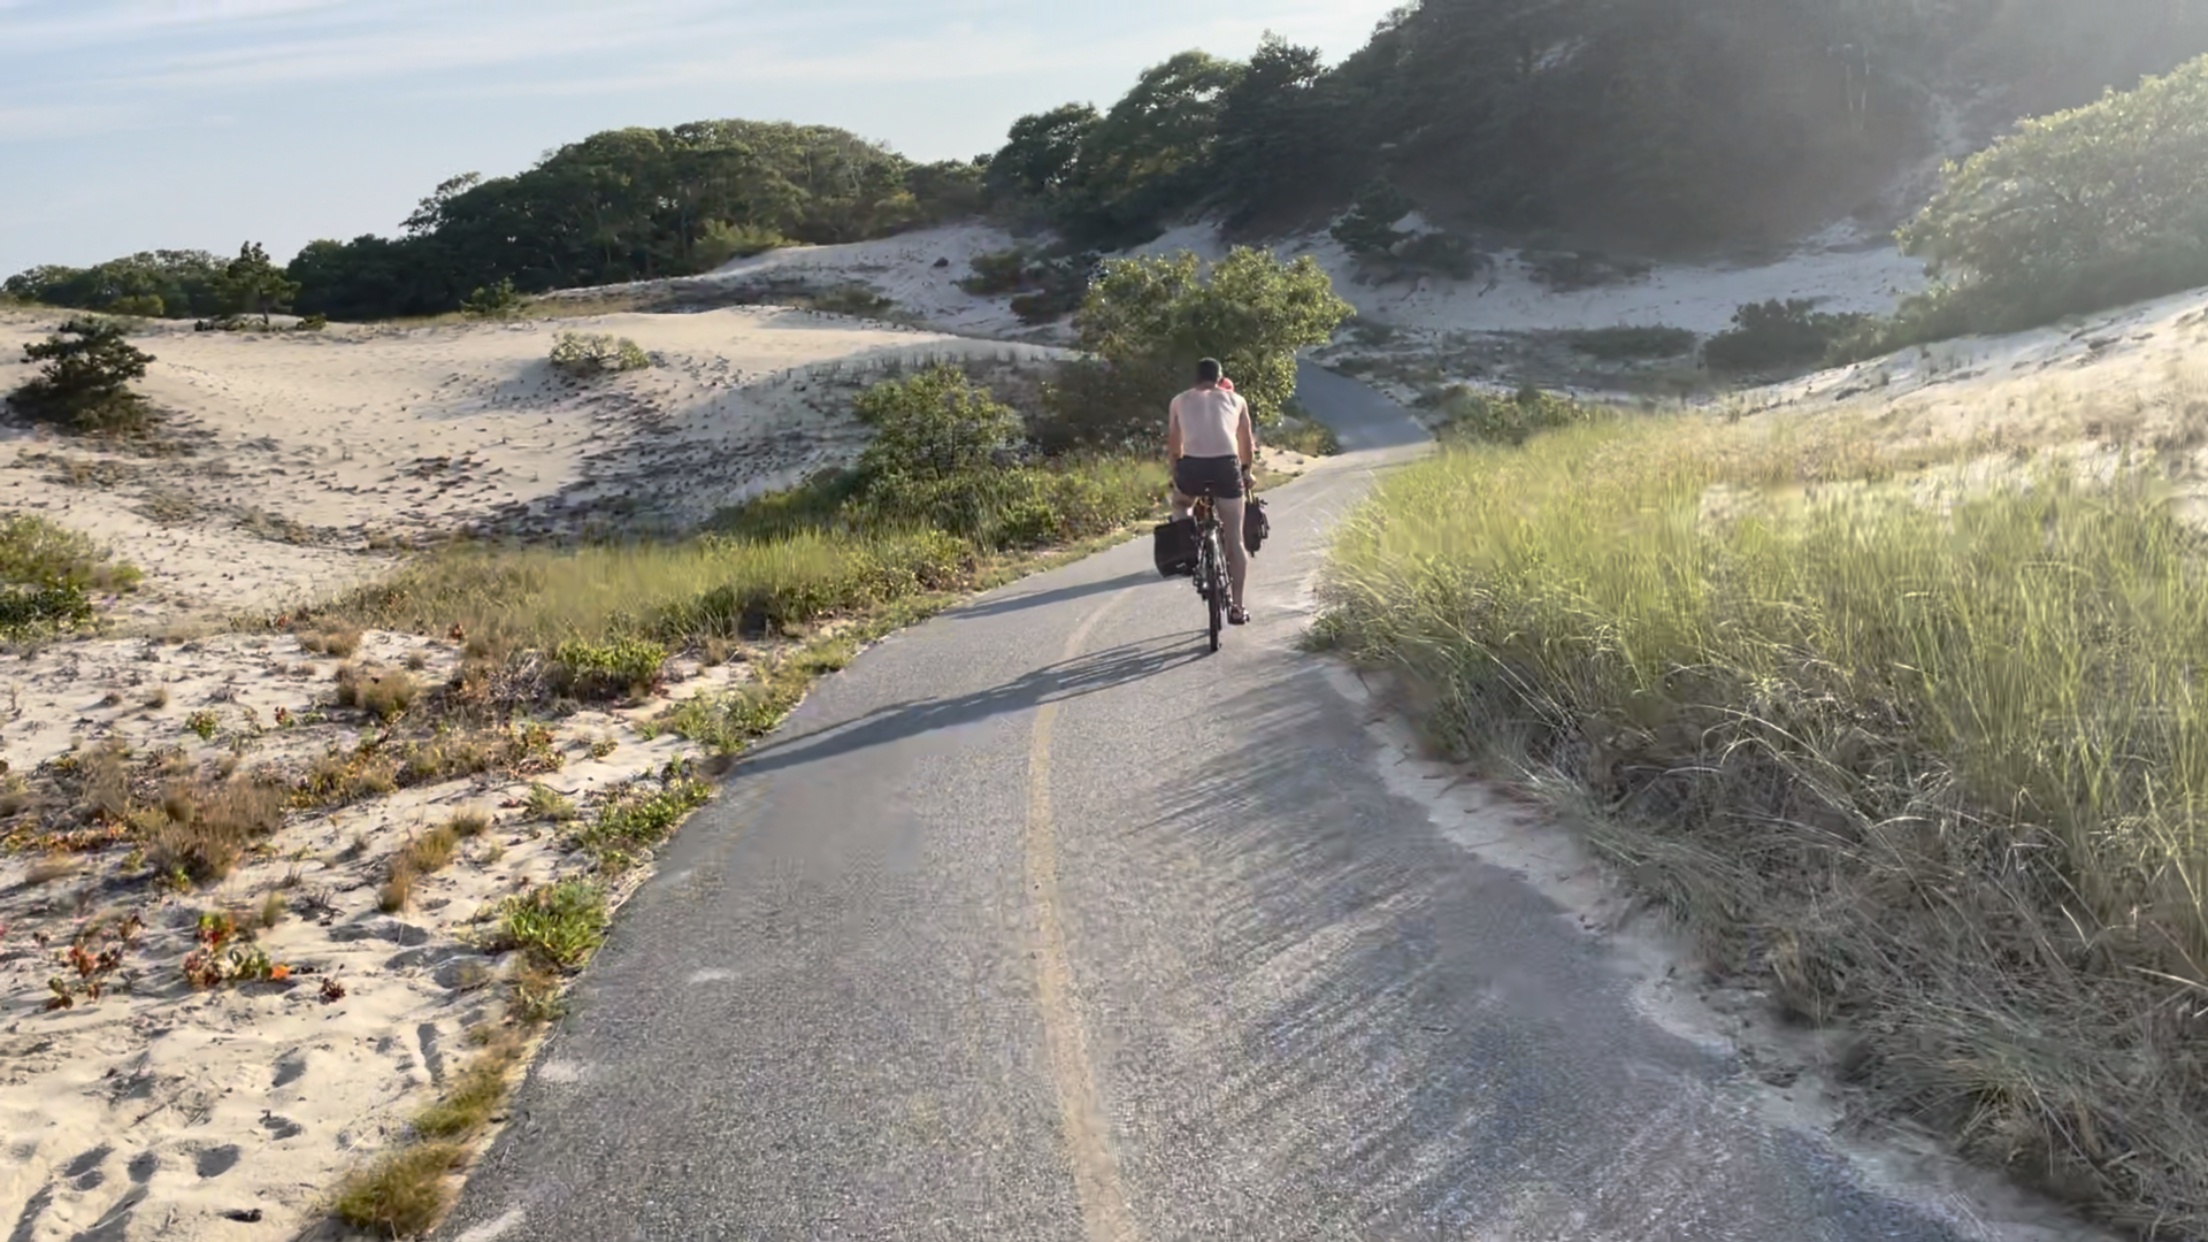 A paved path running through sand dunes. Two people in bikes are in the middle distance.